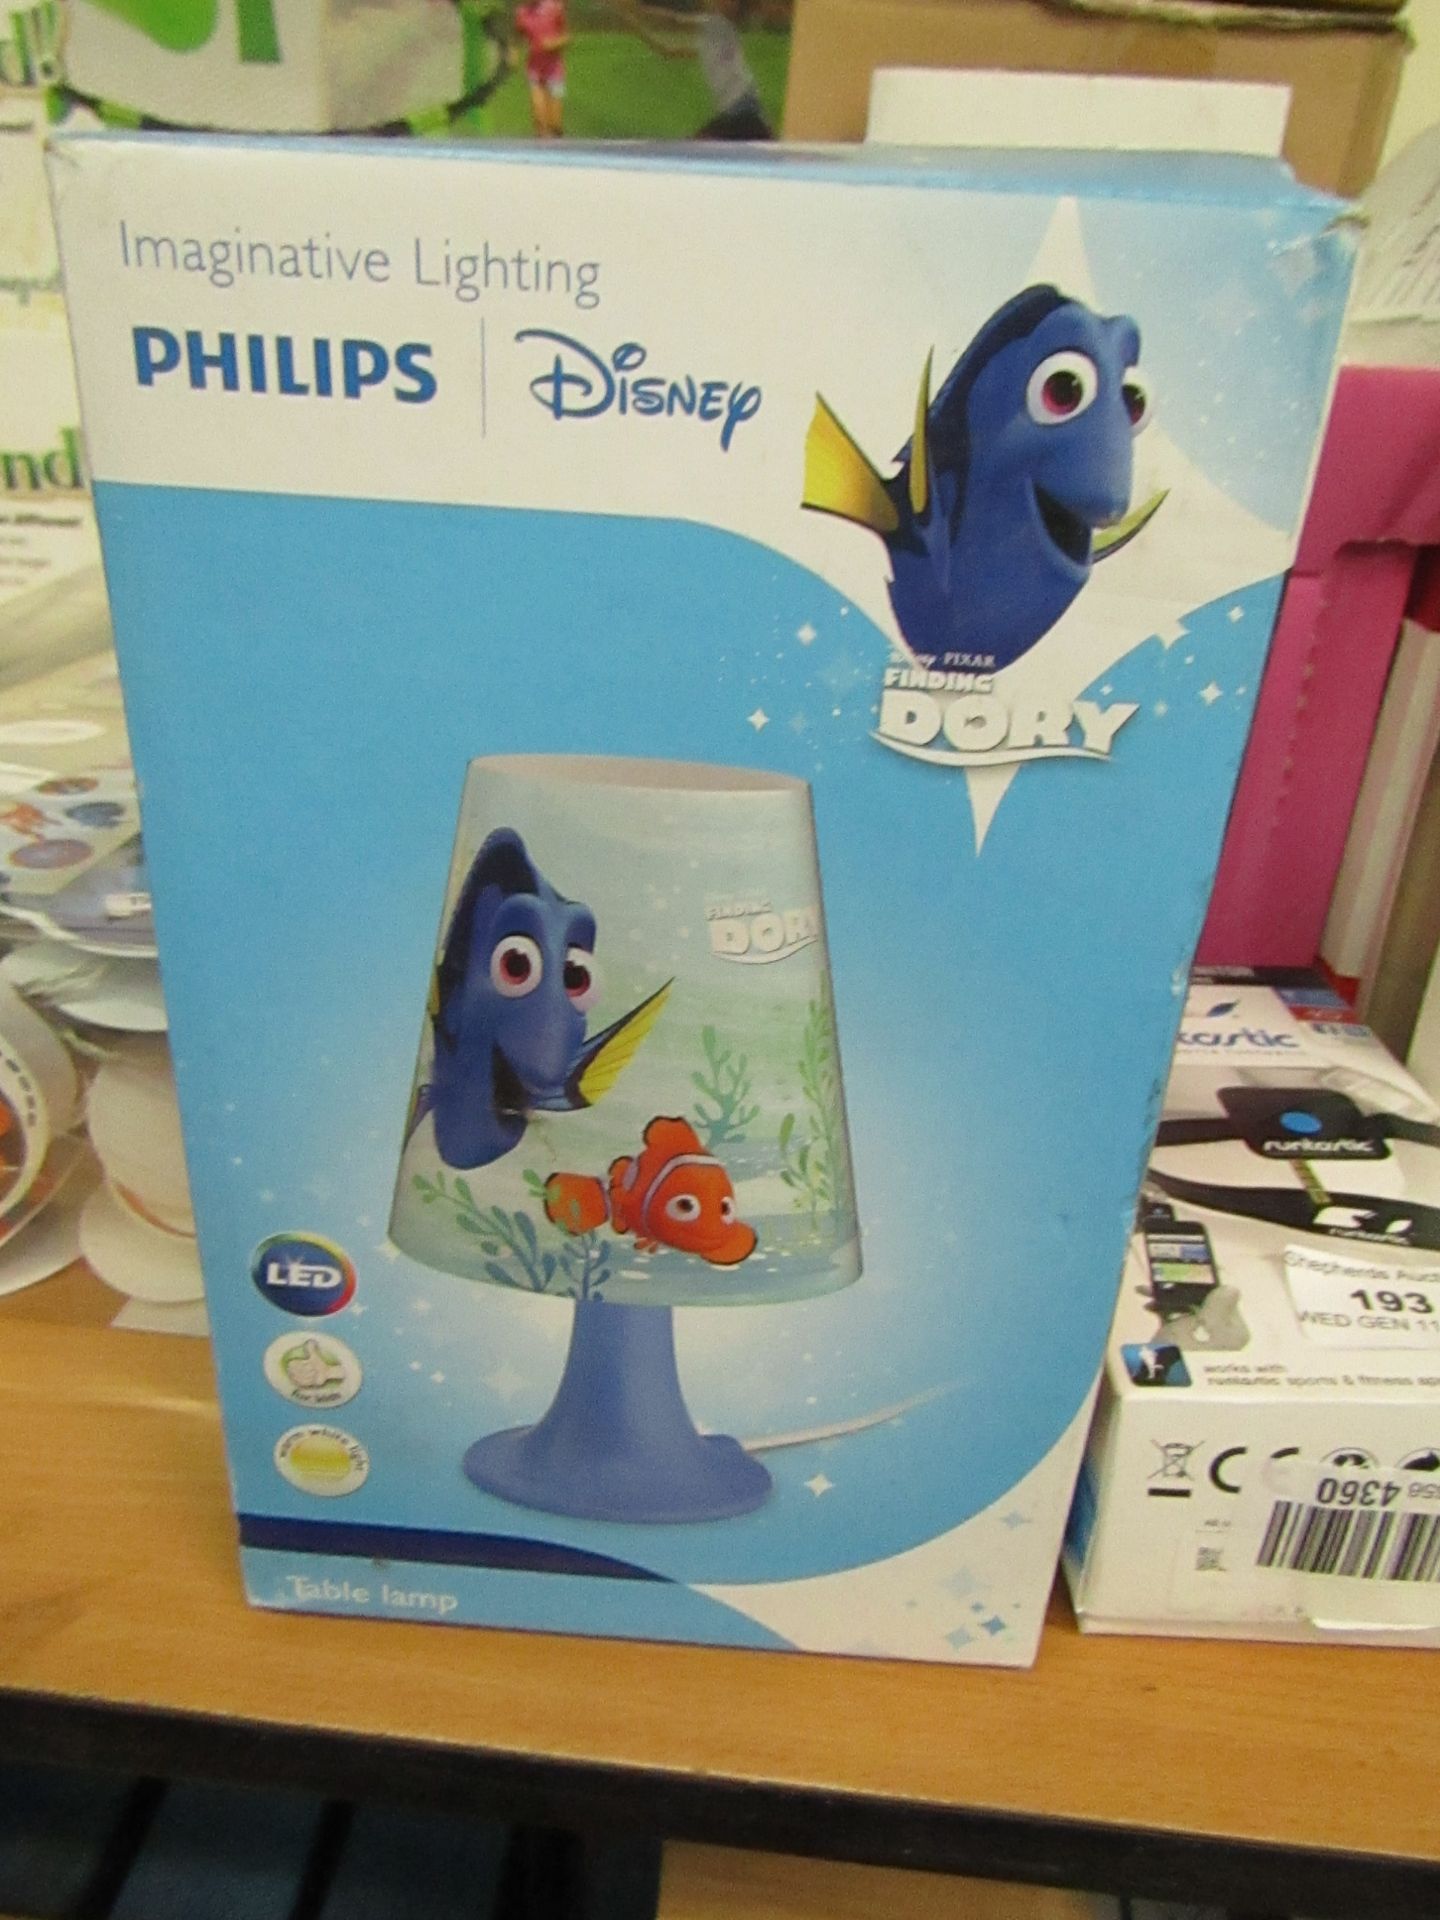 Philips - Disney - Finding Dory Tabe Lamp, untested and boxed.